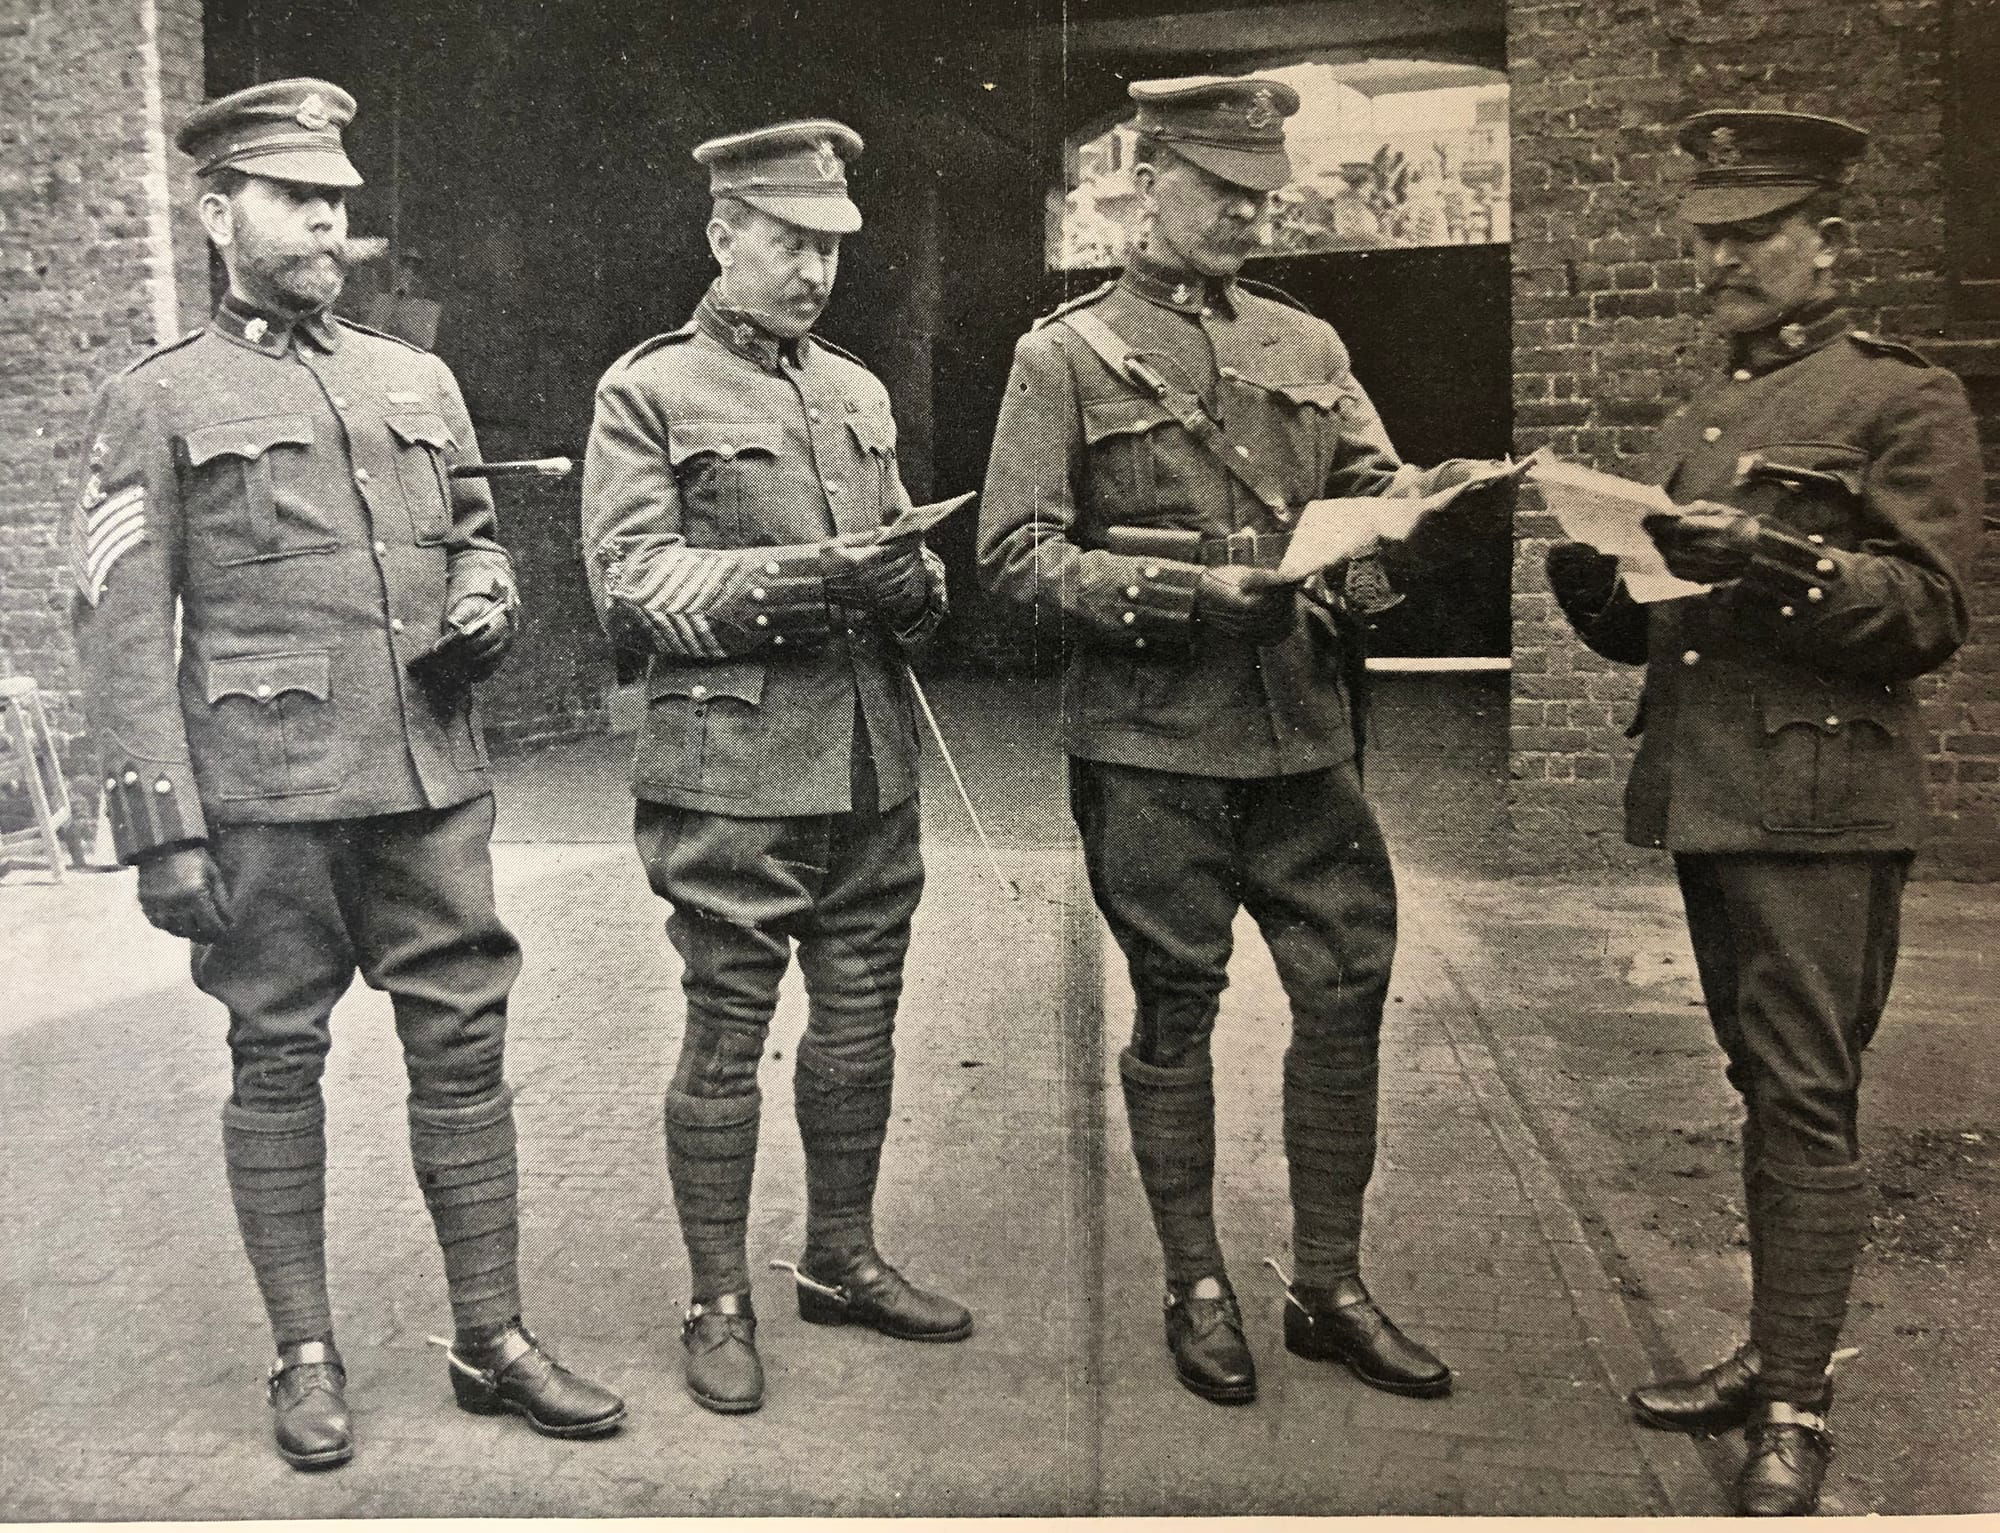 The permanent staff of the King’s Colonials as of 19th April 1902 from left to right are Regimental Sergeant Major Fezan (former 4th Royal Irish Dragoon Guards), Squadron Quarter Master Sergeant Palmer (former 10th Hussars); Captain and Adjutant R. R. Thompson; and Squadron Sergeant Major Thompson (former 13th Hussars) (Navy and Army Illustrated. London: Elliot & Fry, Volume XIV: Number 274, 147-148, May 3rd 1902).